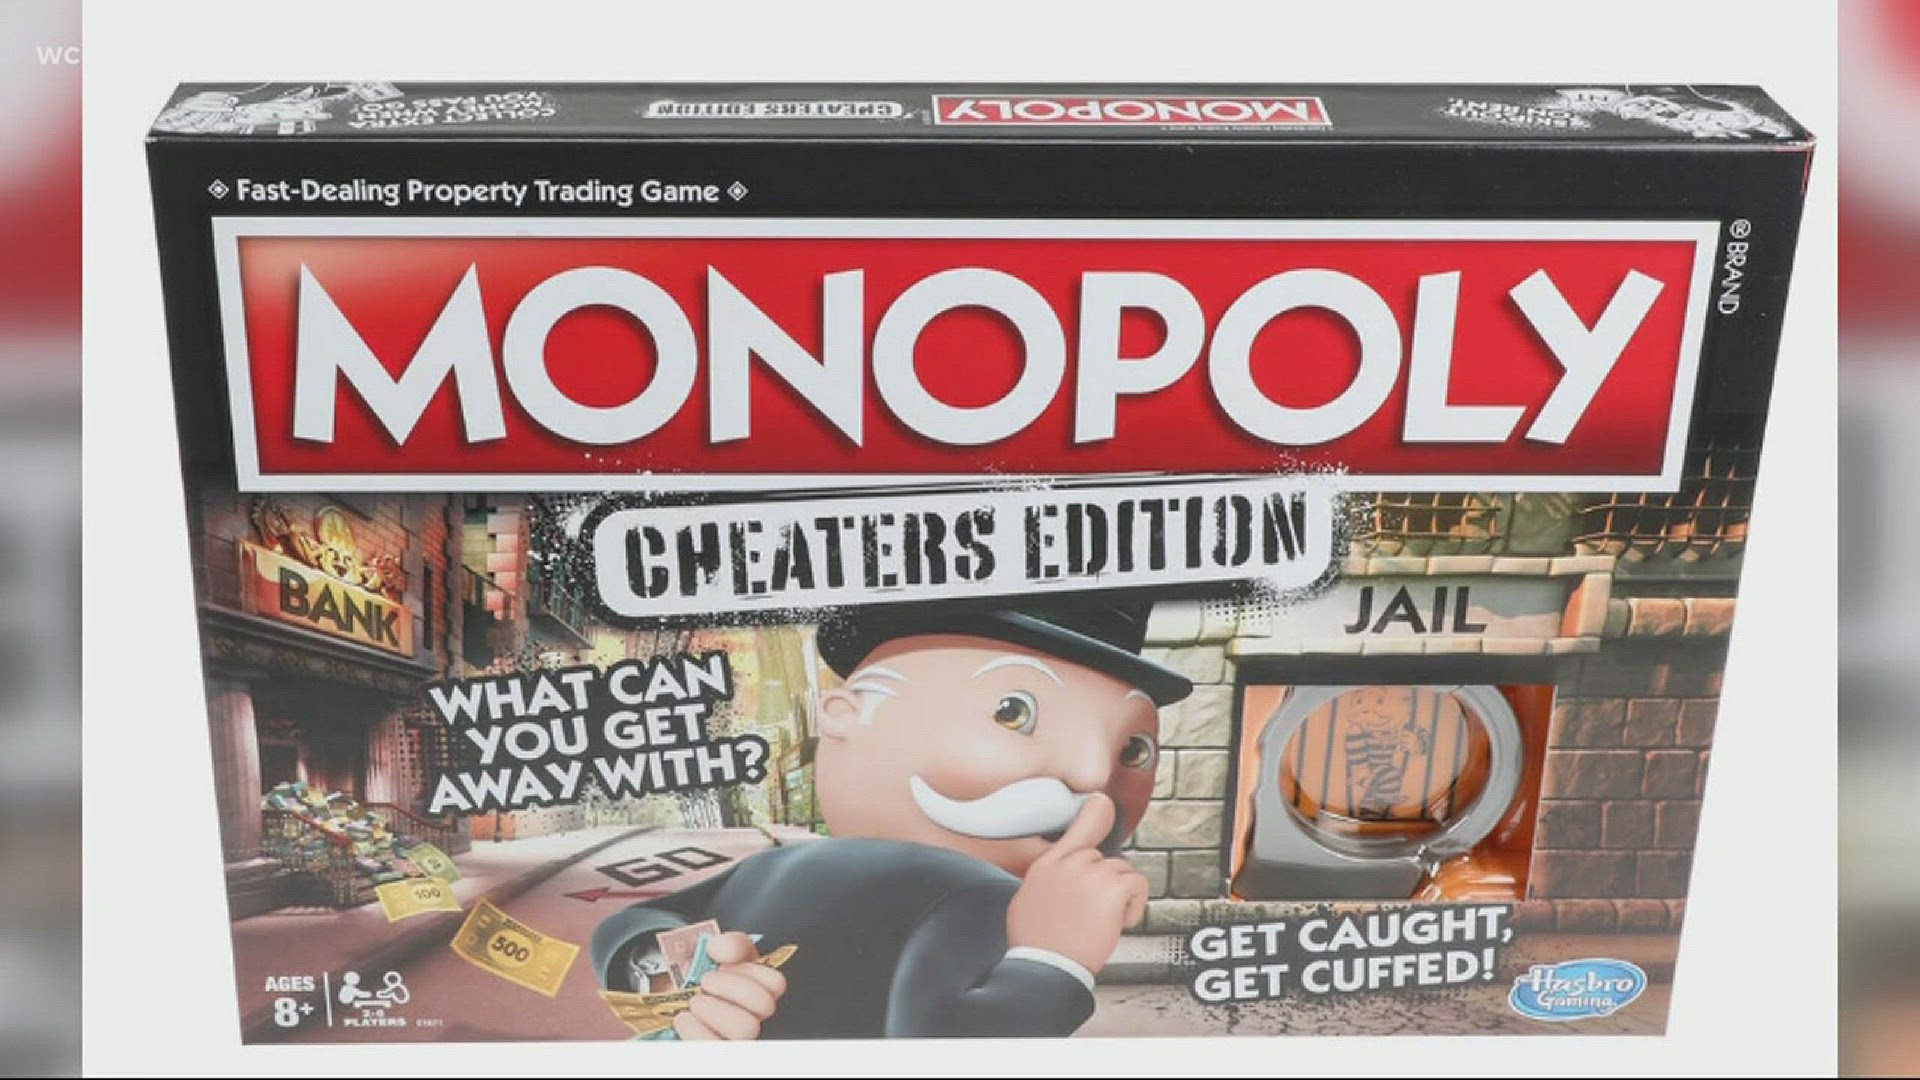 After a recent study found that nearly half of people cheat at Monopoly, Hasbro is releasing a new version of the game specifically for dirty players.